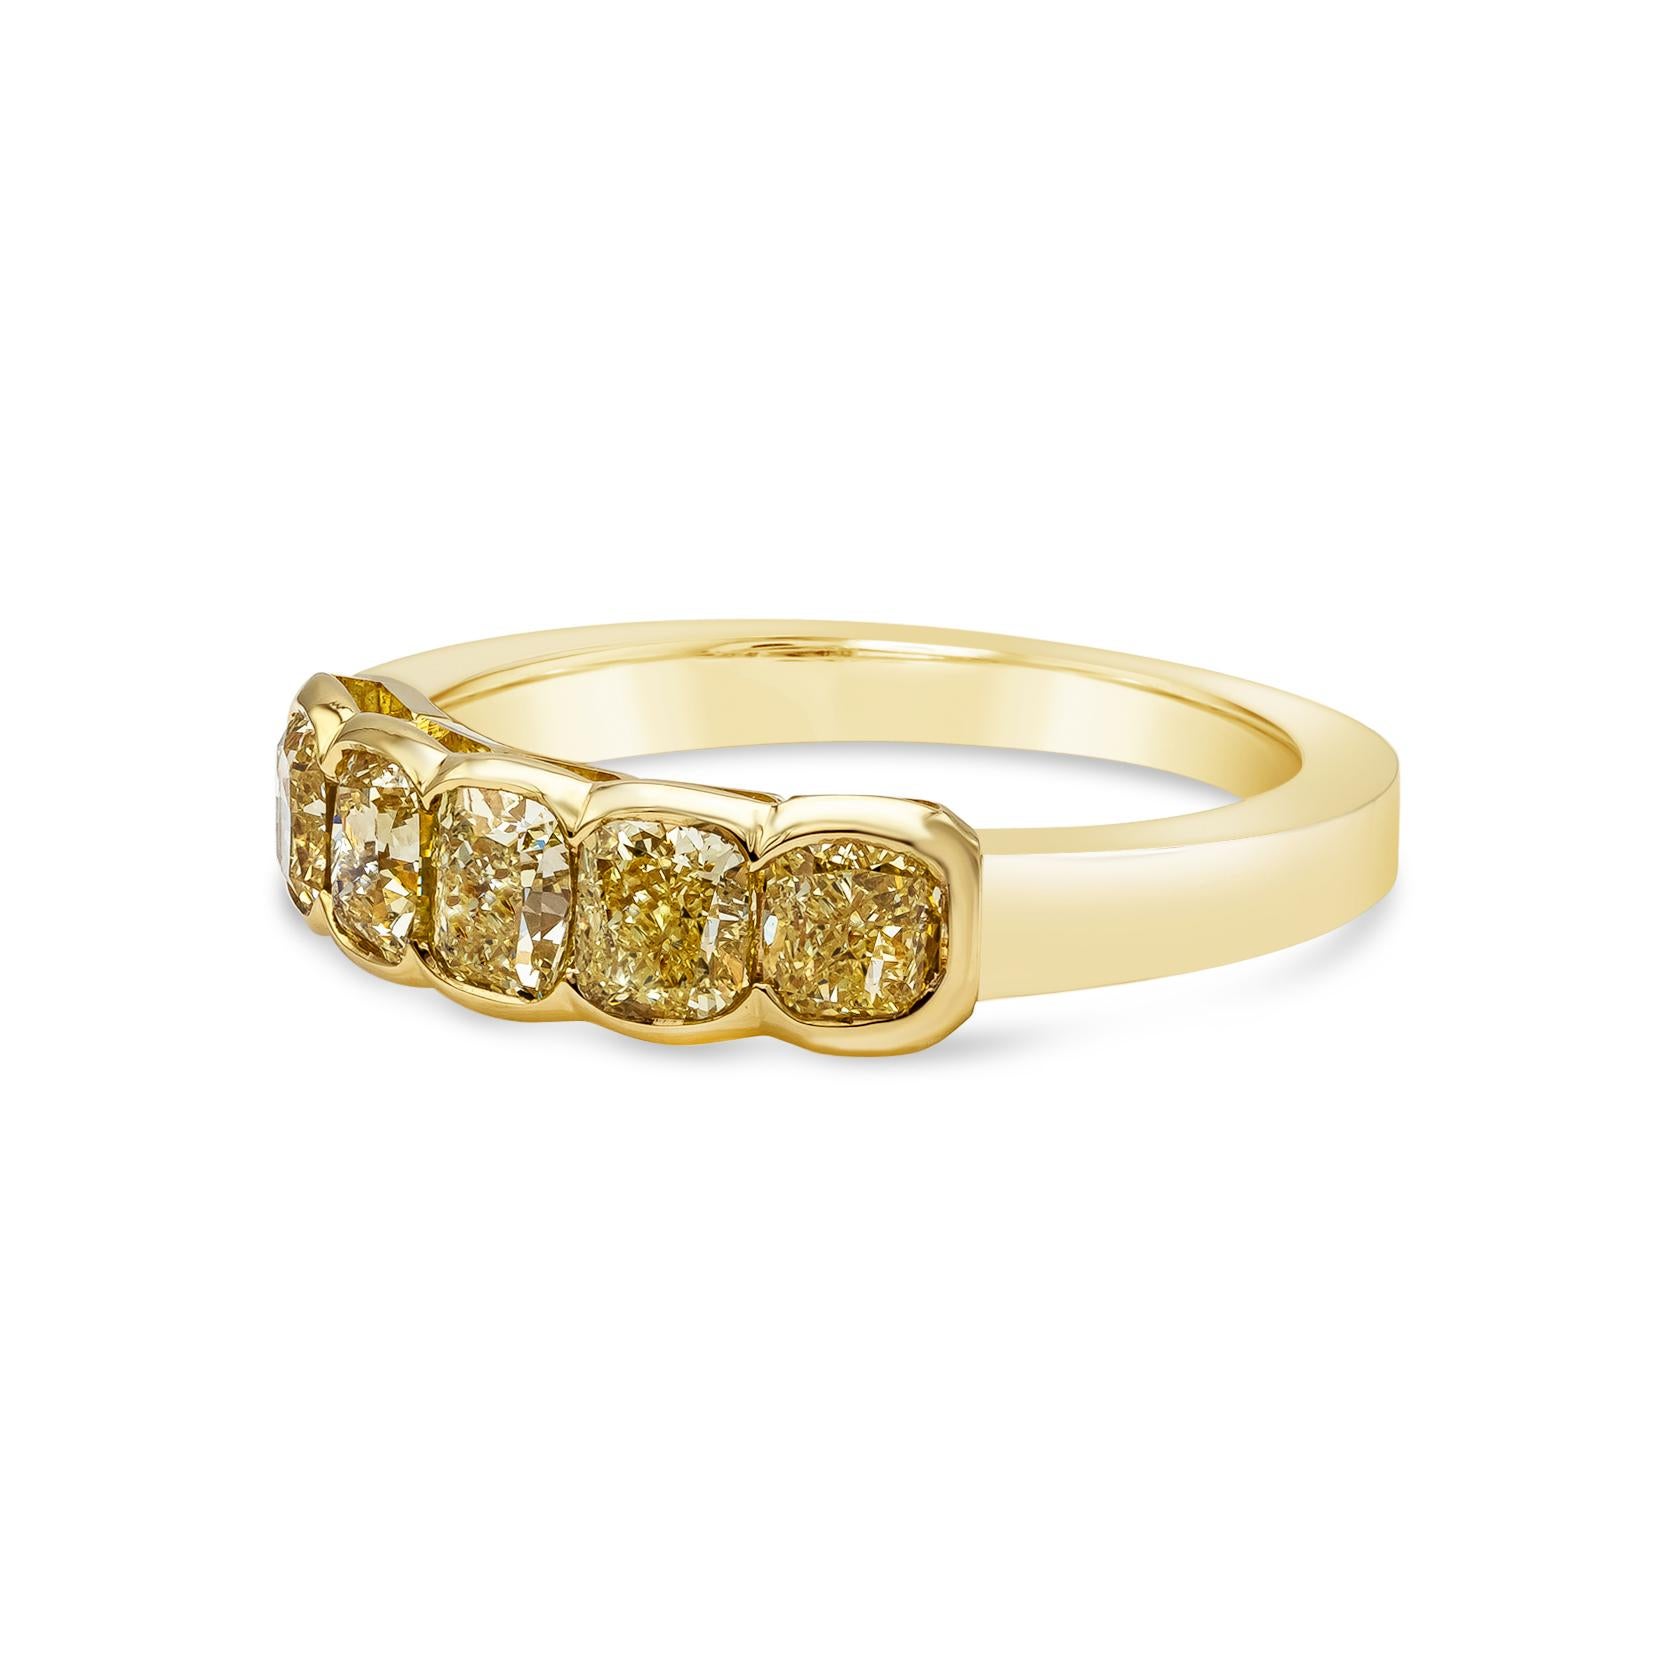 A color-rich wedding band showcasing five cushion cut intense yellow diamonds weighing 1.69 carats total, set in a chic semi-bezel made in 18k yellow gold. Size 6.5 US (sizable upon request).

Style available in different price ranges. Prices are